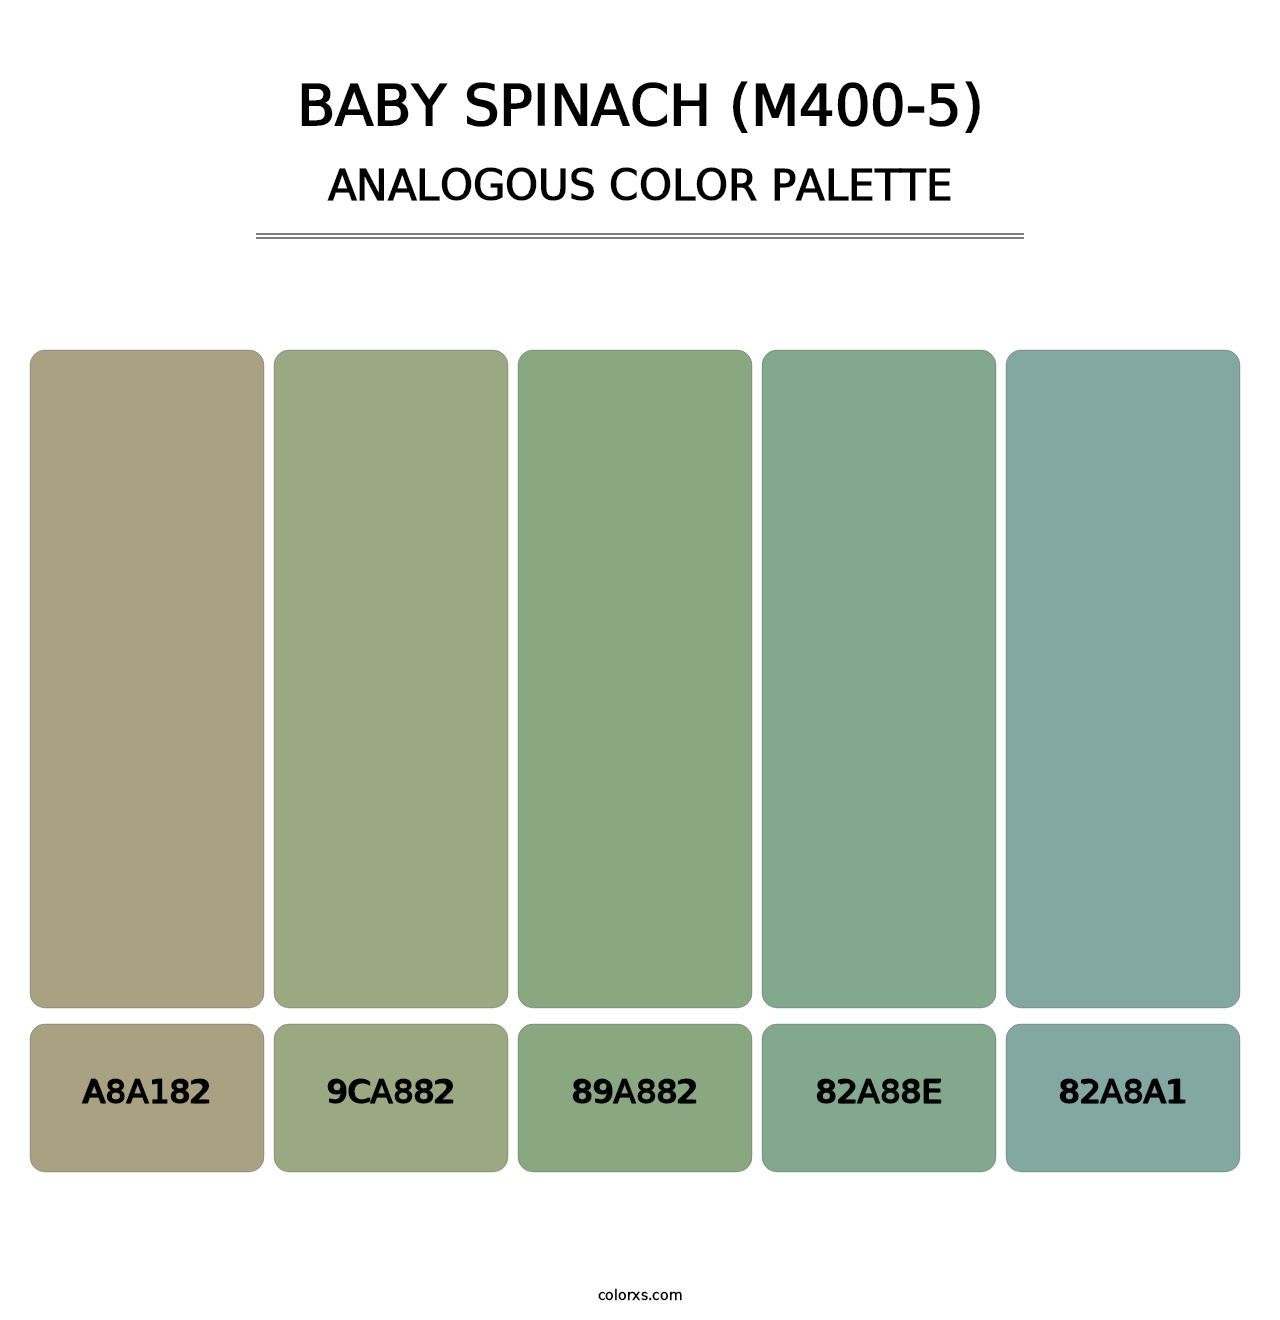 Baby Spinach (M400-5) - Analogous Color Palette